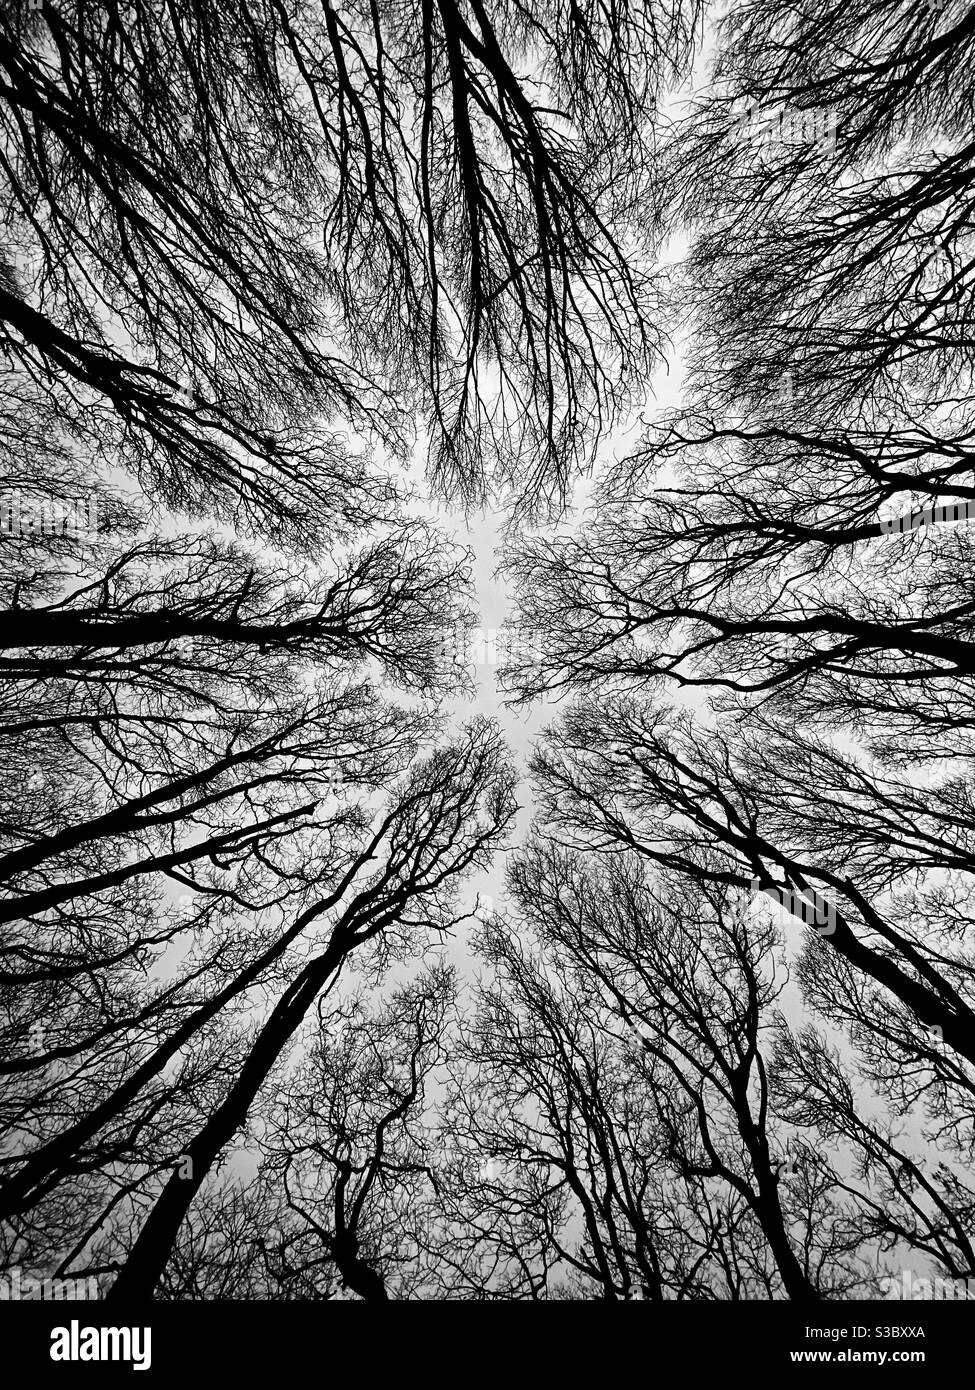 Looking up at Bare winter trees Stock Photo